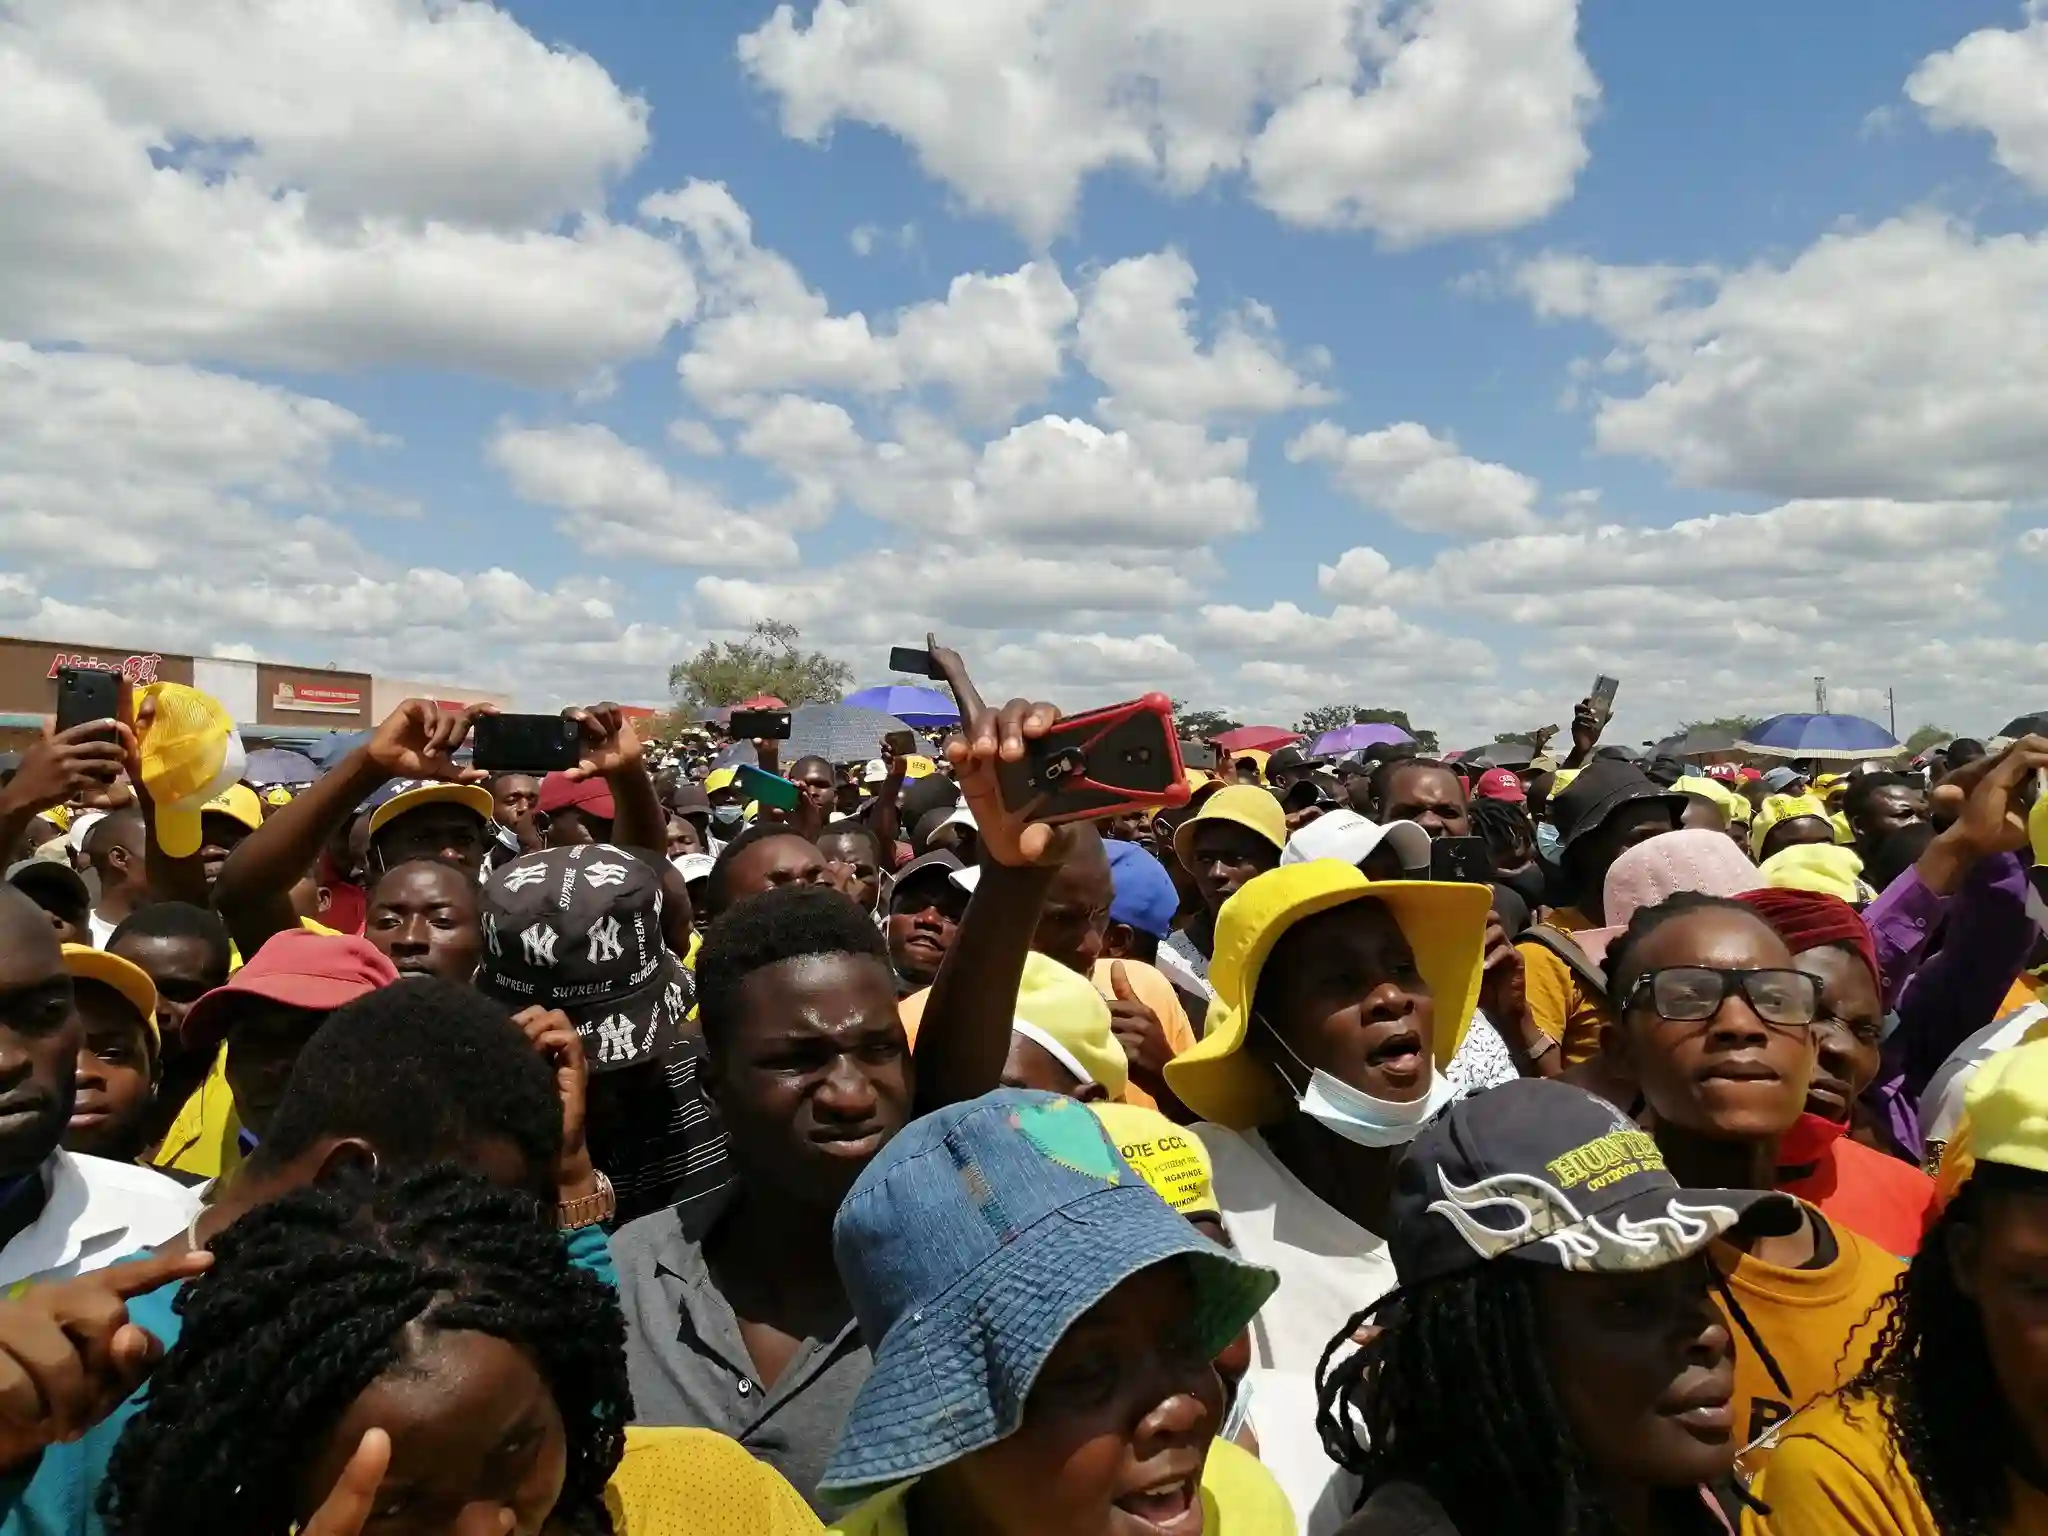 PICTURES: CCC Rally At Mbizo 4 Shopping Centre, Kwekwe